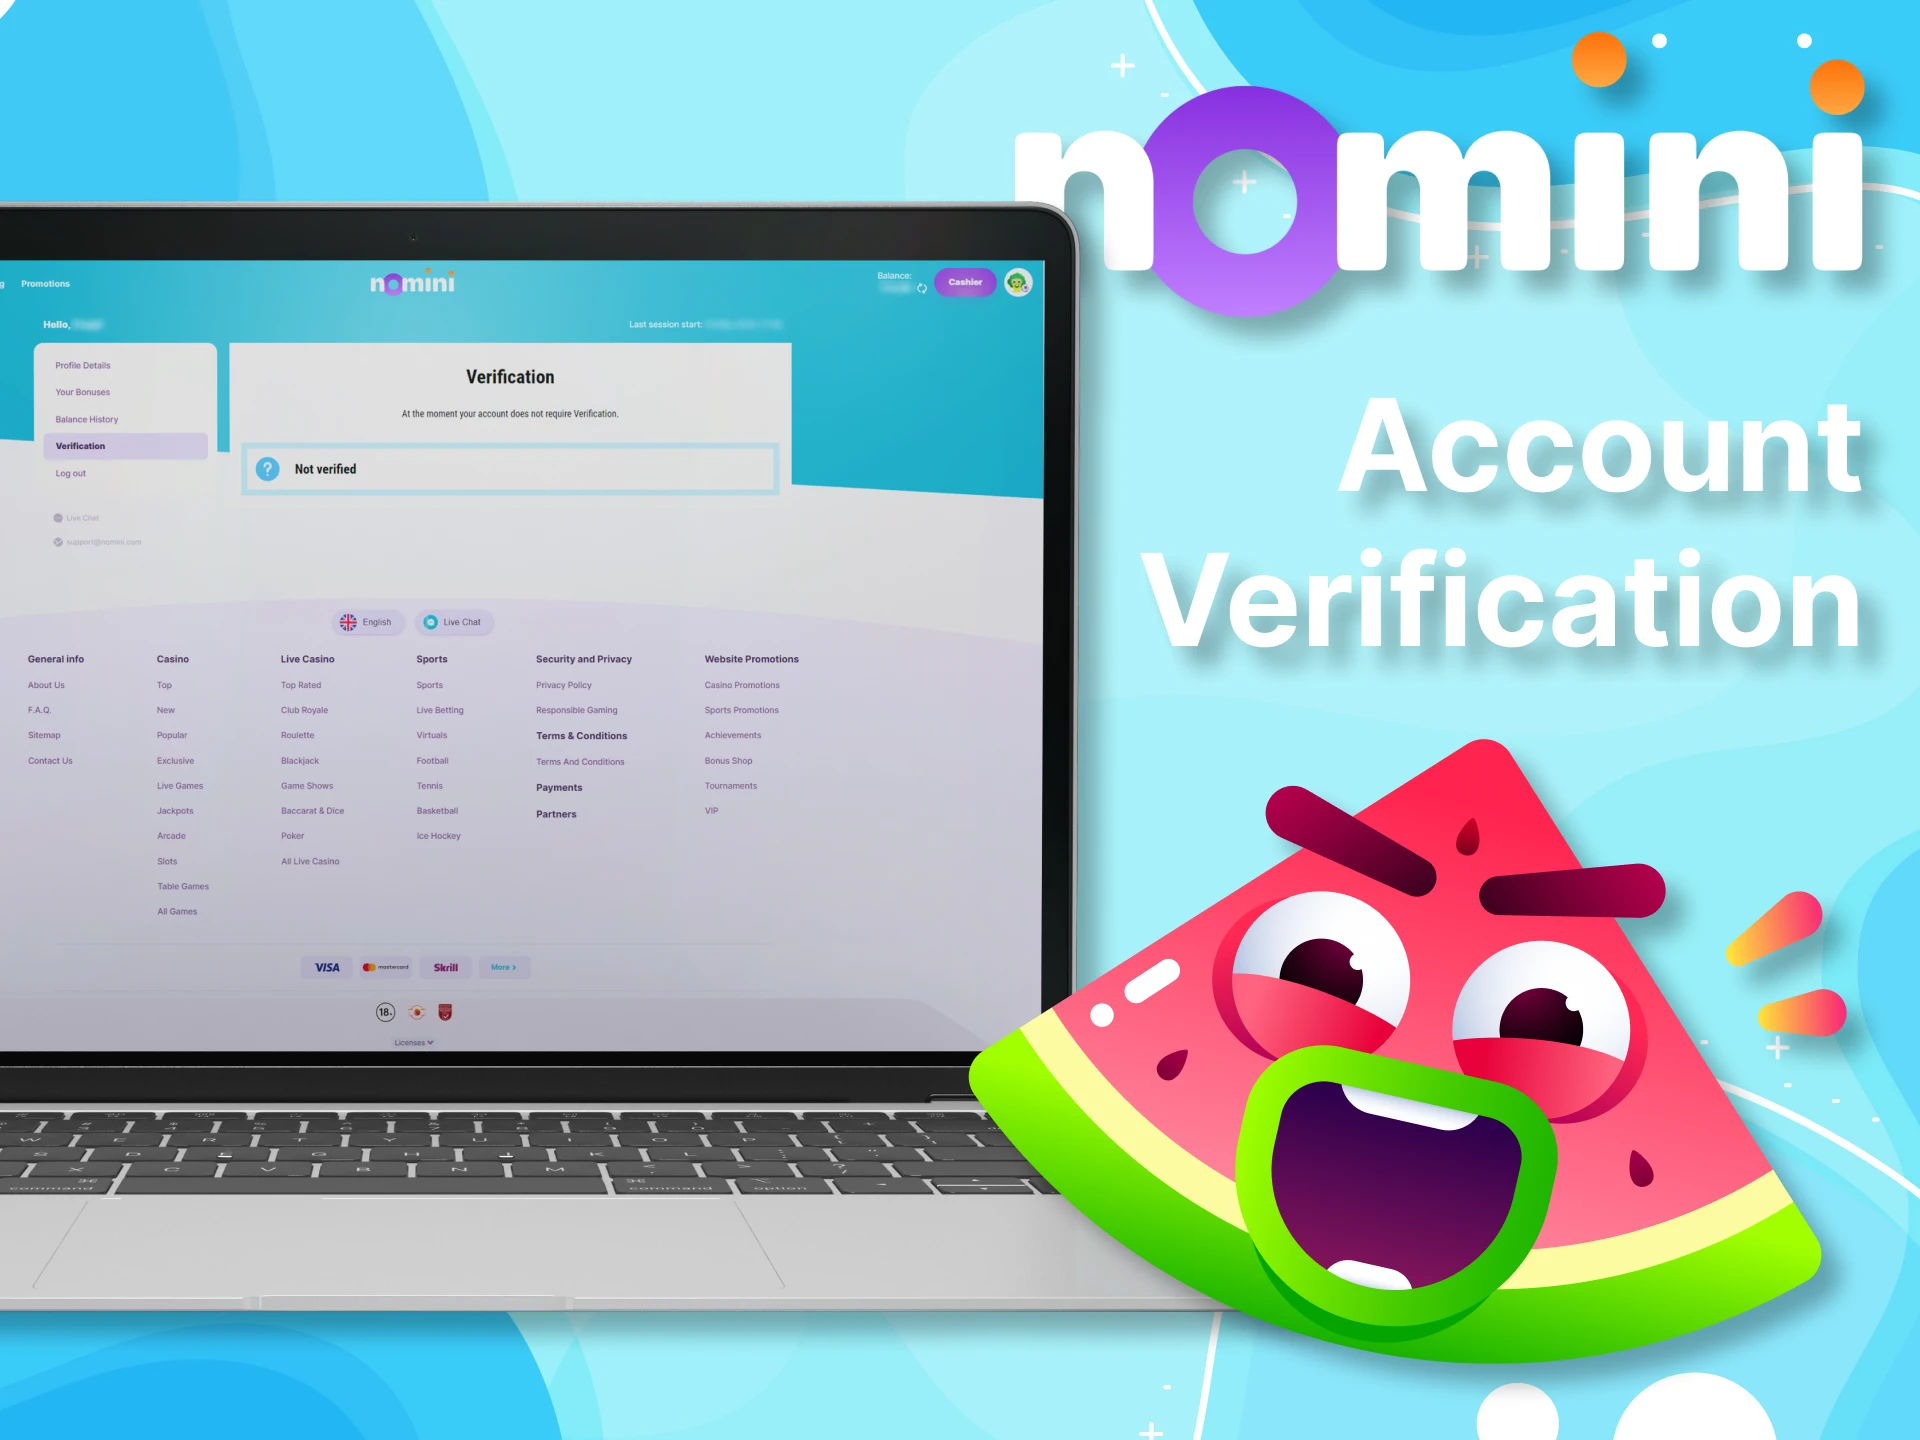 Confirm your identity with Nomini to gain access to all features.